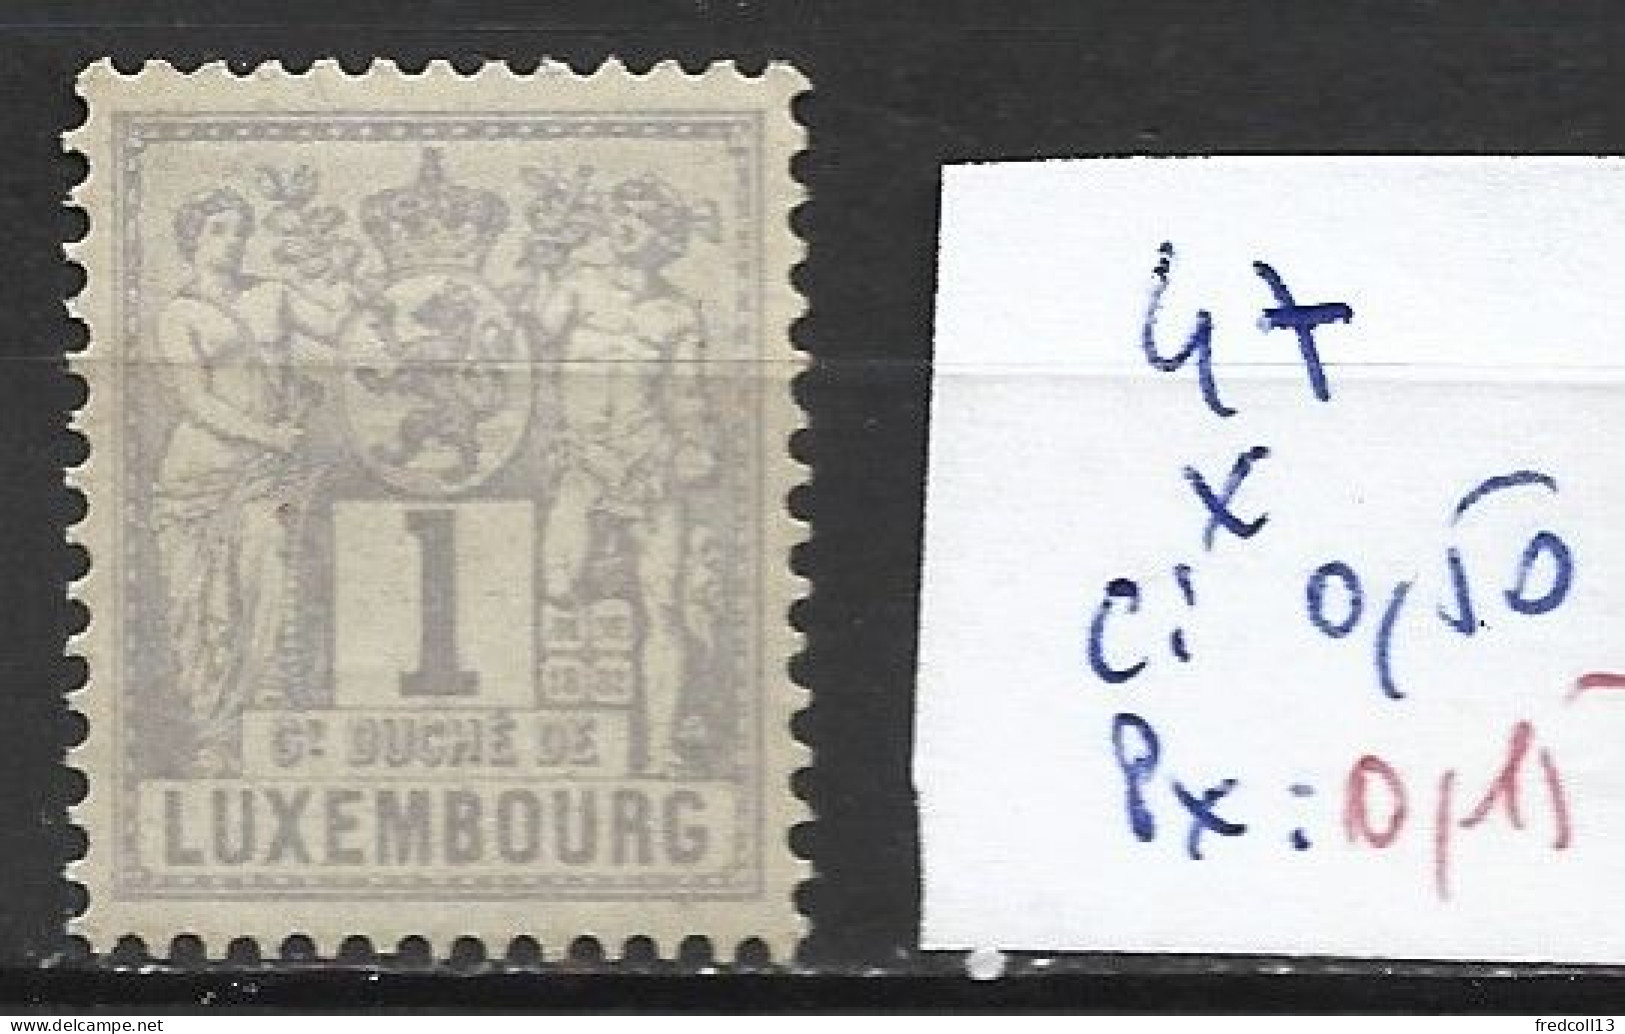 LUXEMBOURG 47 * Côte 0.50 € - 1882 Allegory